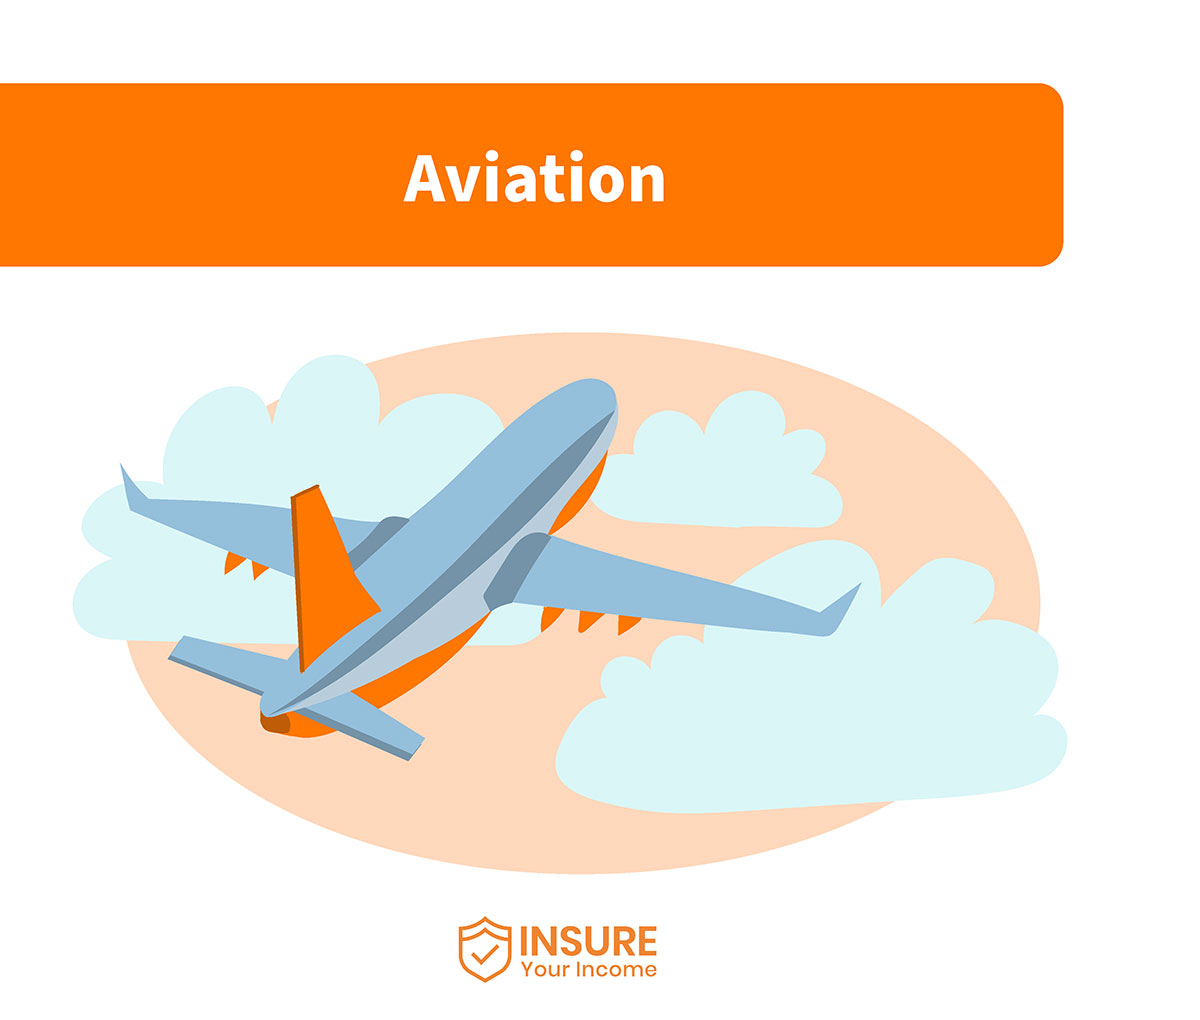 Insure your income for aviation 